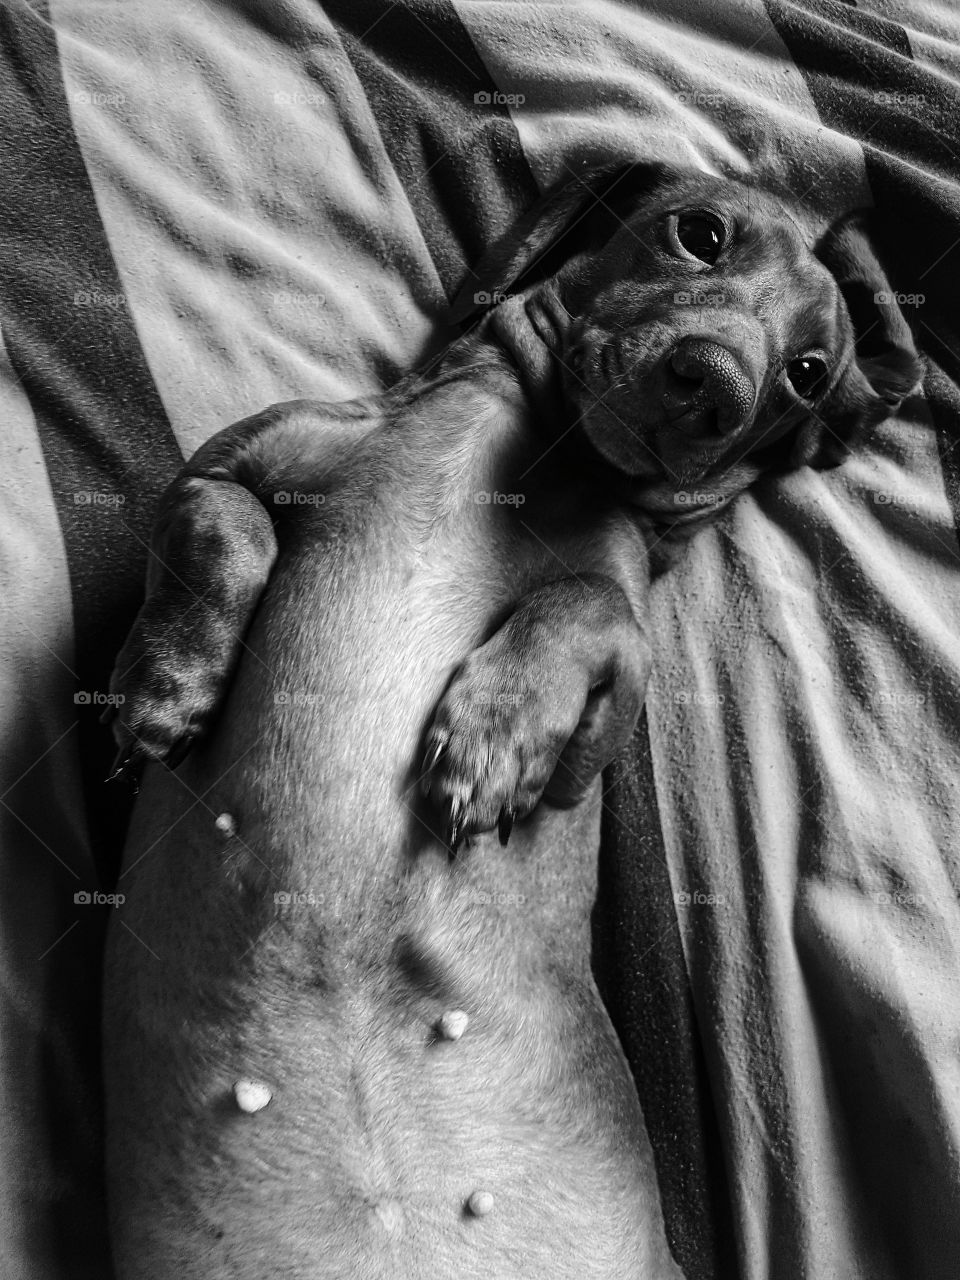 dachshund dog lay on back on bed in black and white looking at the camera